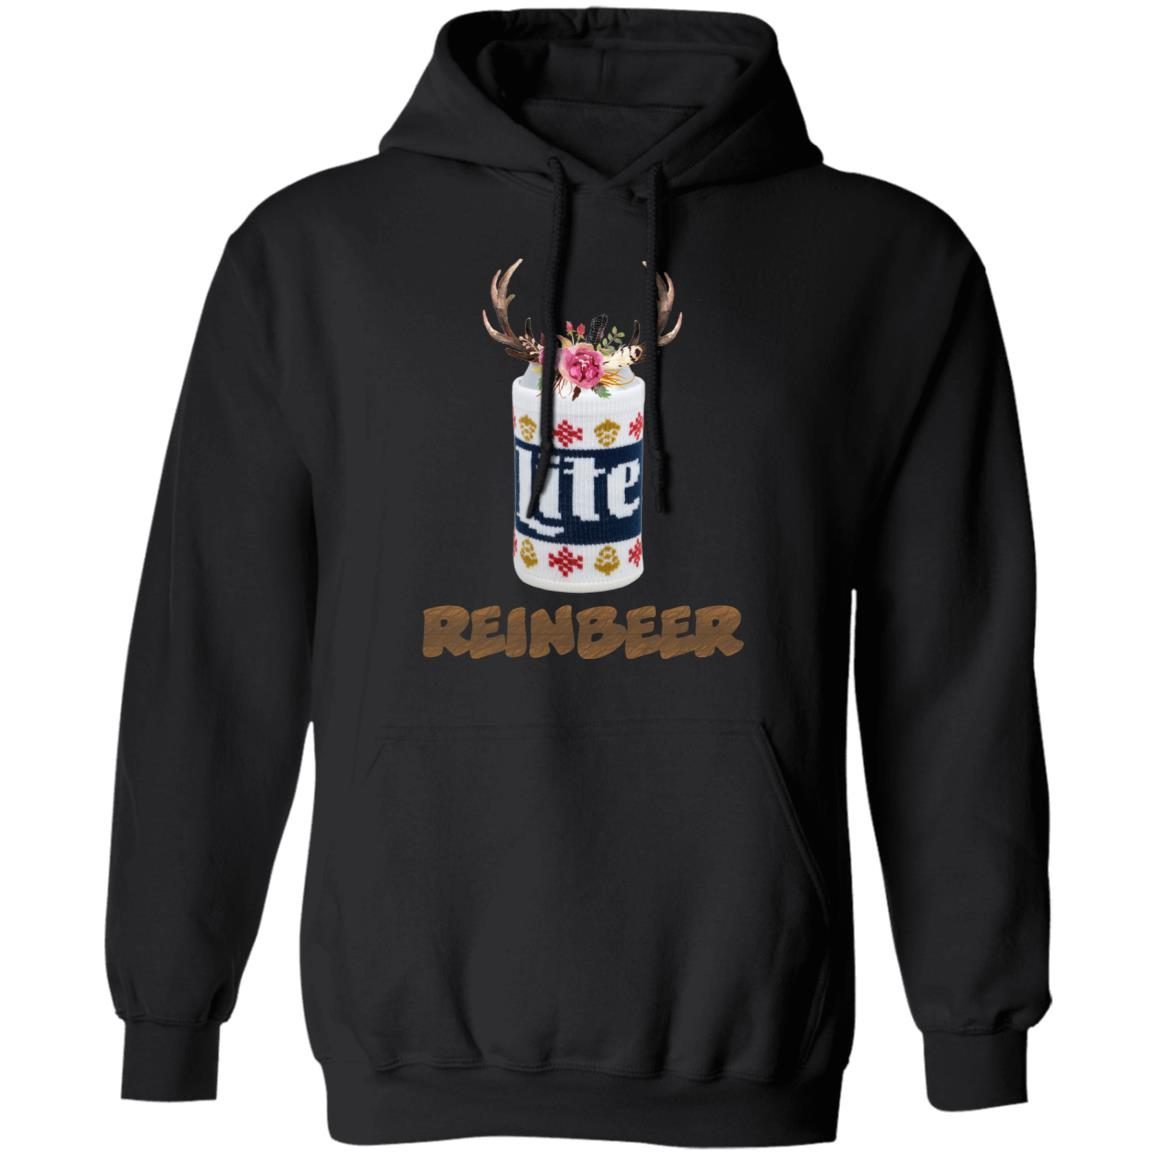 Can Miller Lite Reinbeer Funny Christmas Sweater 3